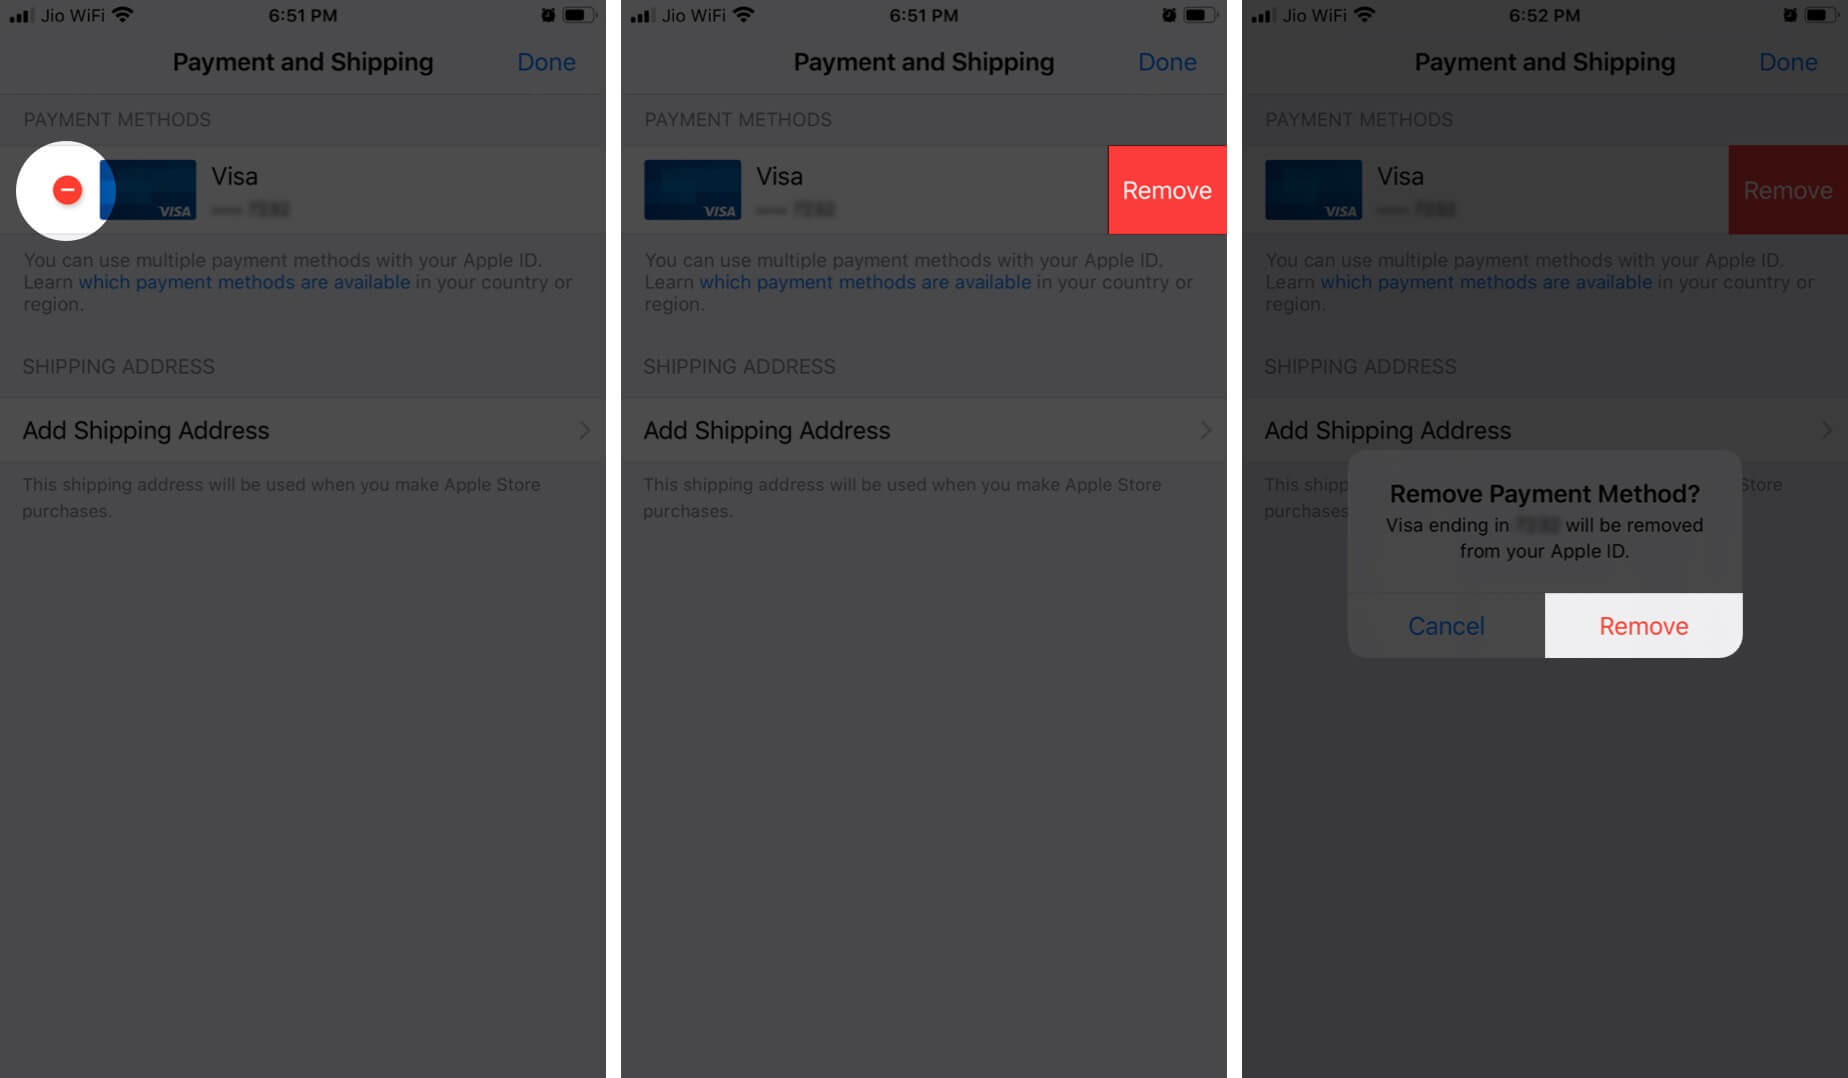 Tap on Remove to Delete Apple ID and Payment Method on iPhone